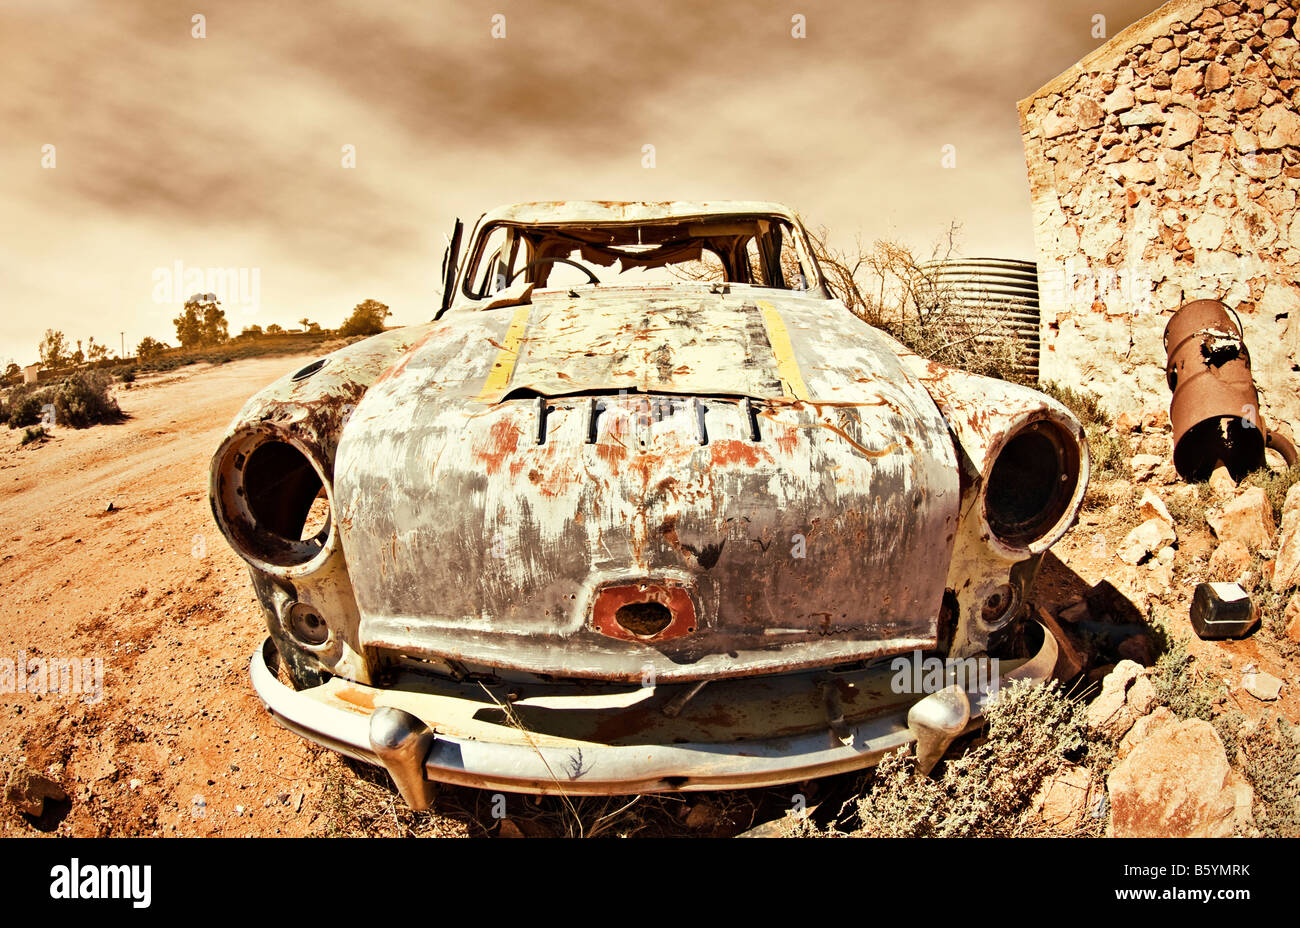 great image of an old car rusting away in the desert Stock Photo